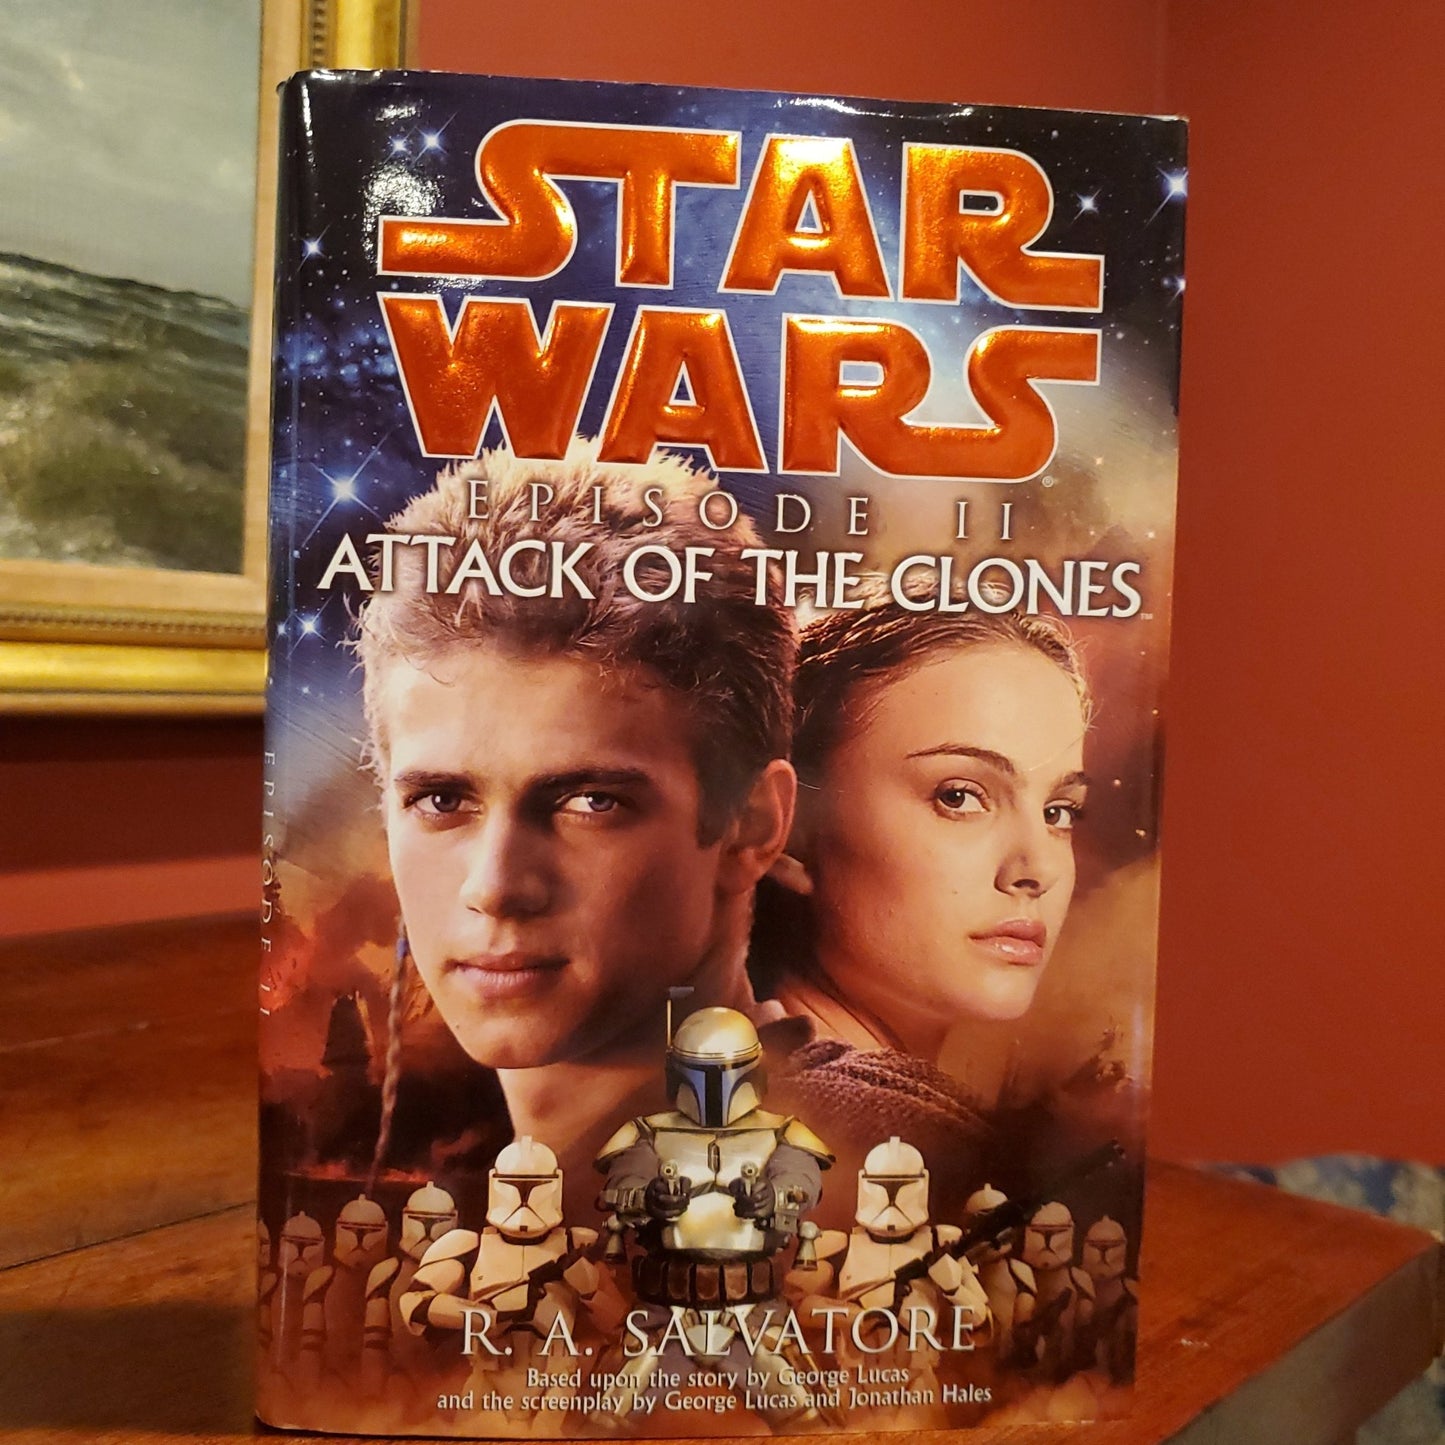 STAR WARS Episode II :Attack of the Clones - [ash-ling] Booksellers